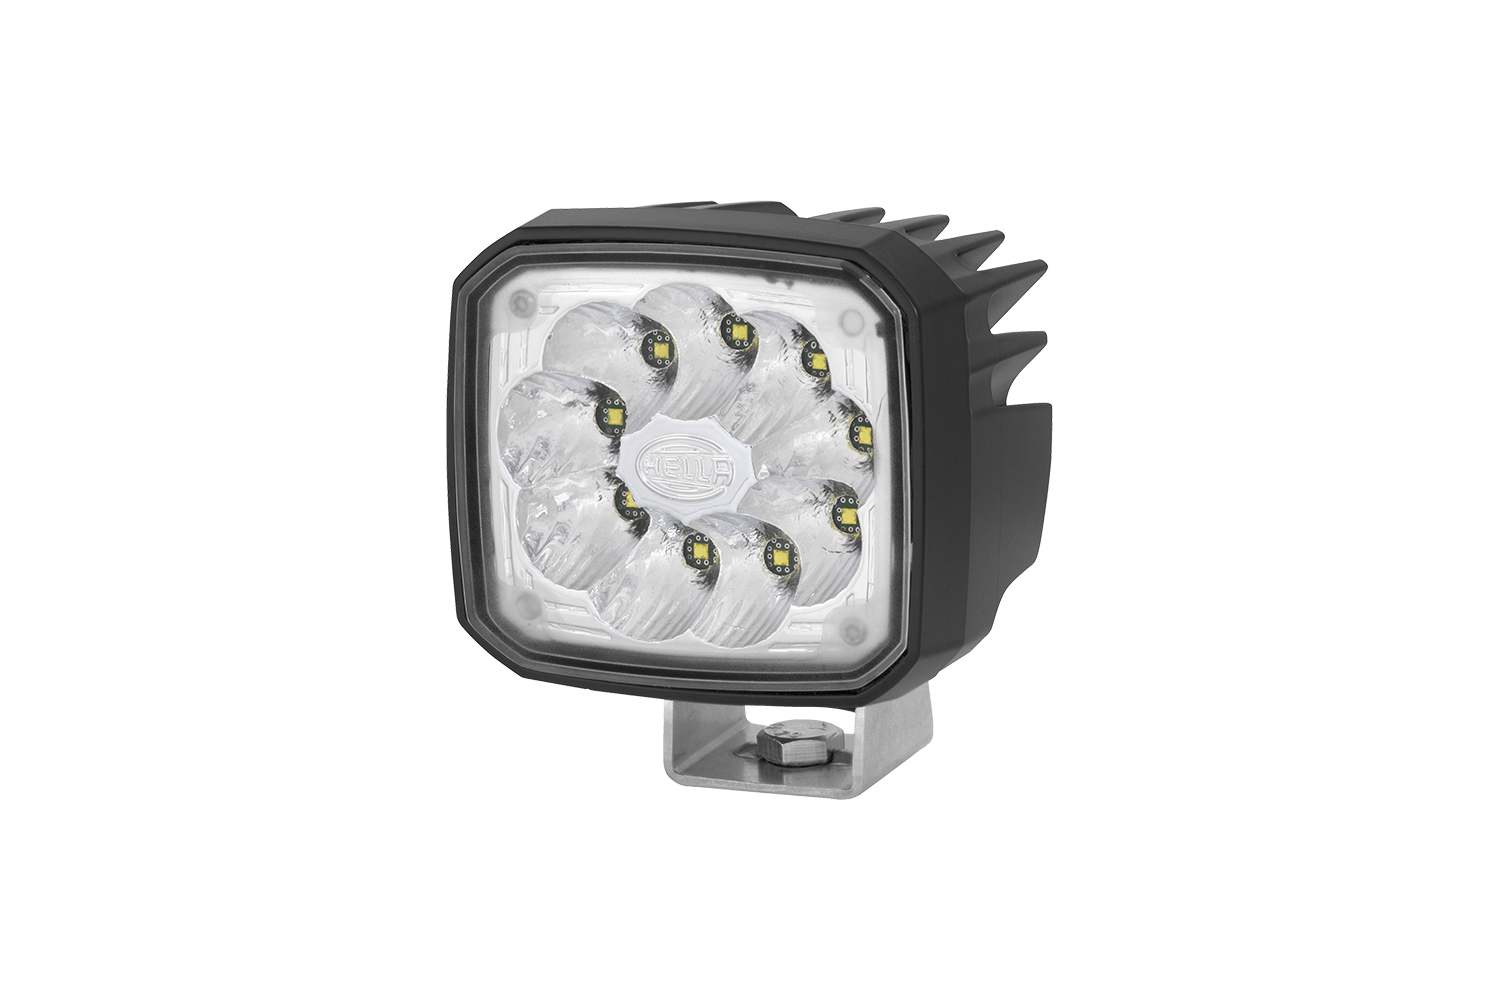 Ultra Beam LED Generation 1 work lamps from Hella offered by Patlon